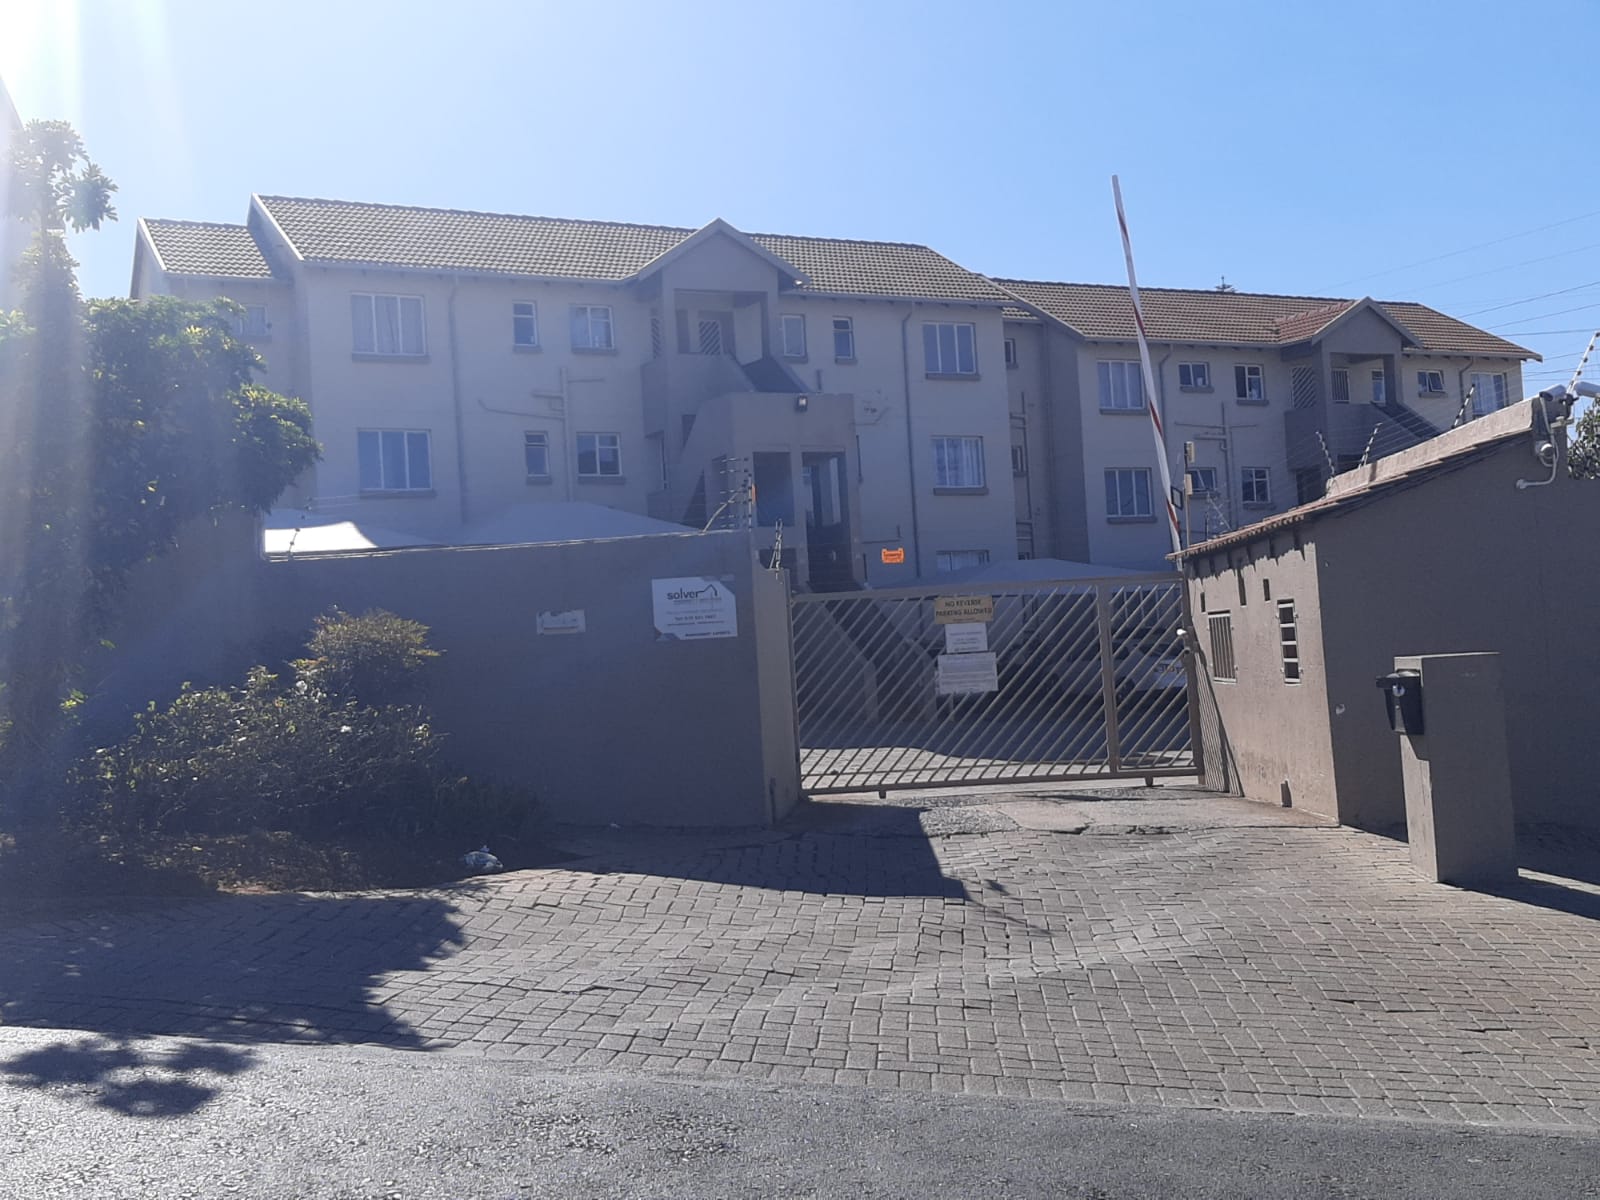 2 BEDROOM TOWNHOUSE - LINMEYER JHB SOUTH